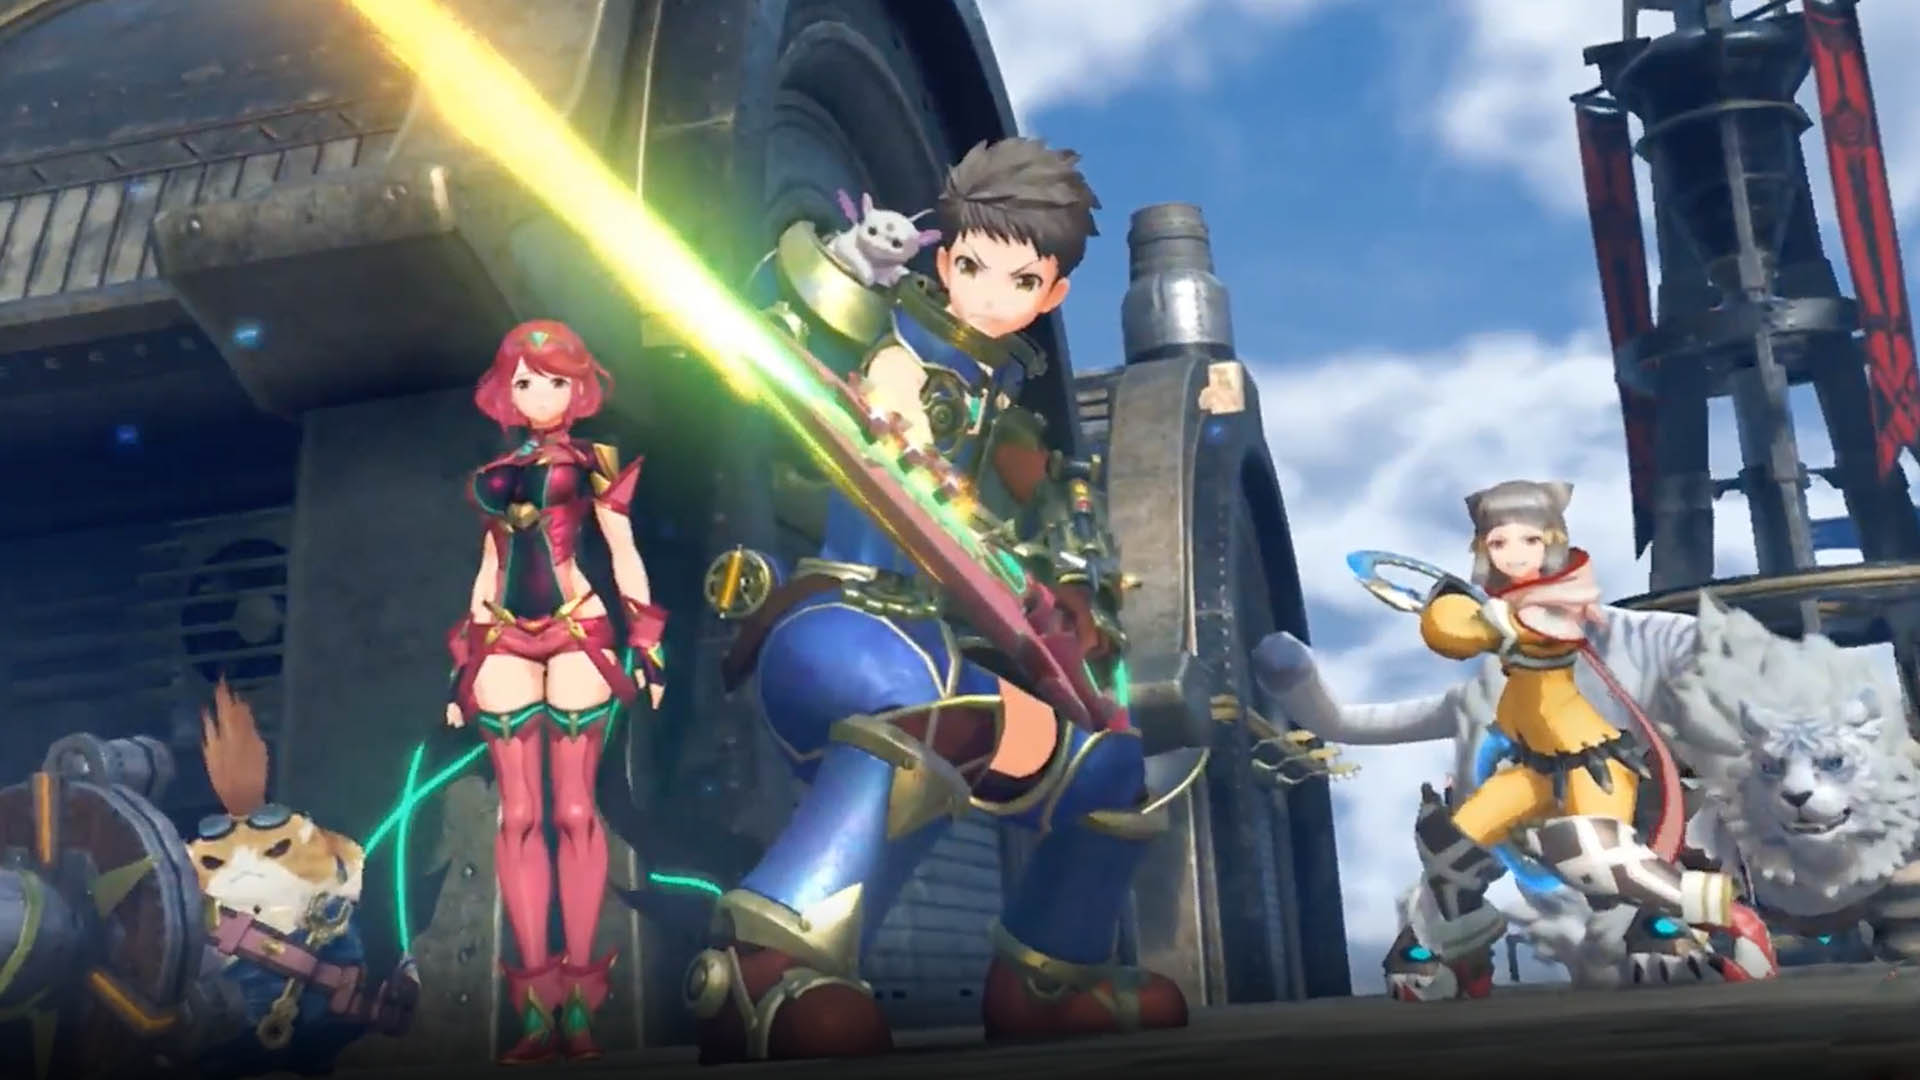 Blades - Xenoblade Chronicles 2 Wiki Guide - IGN